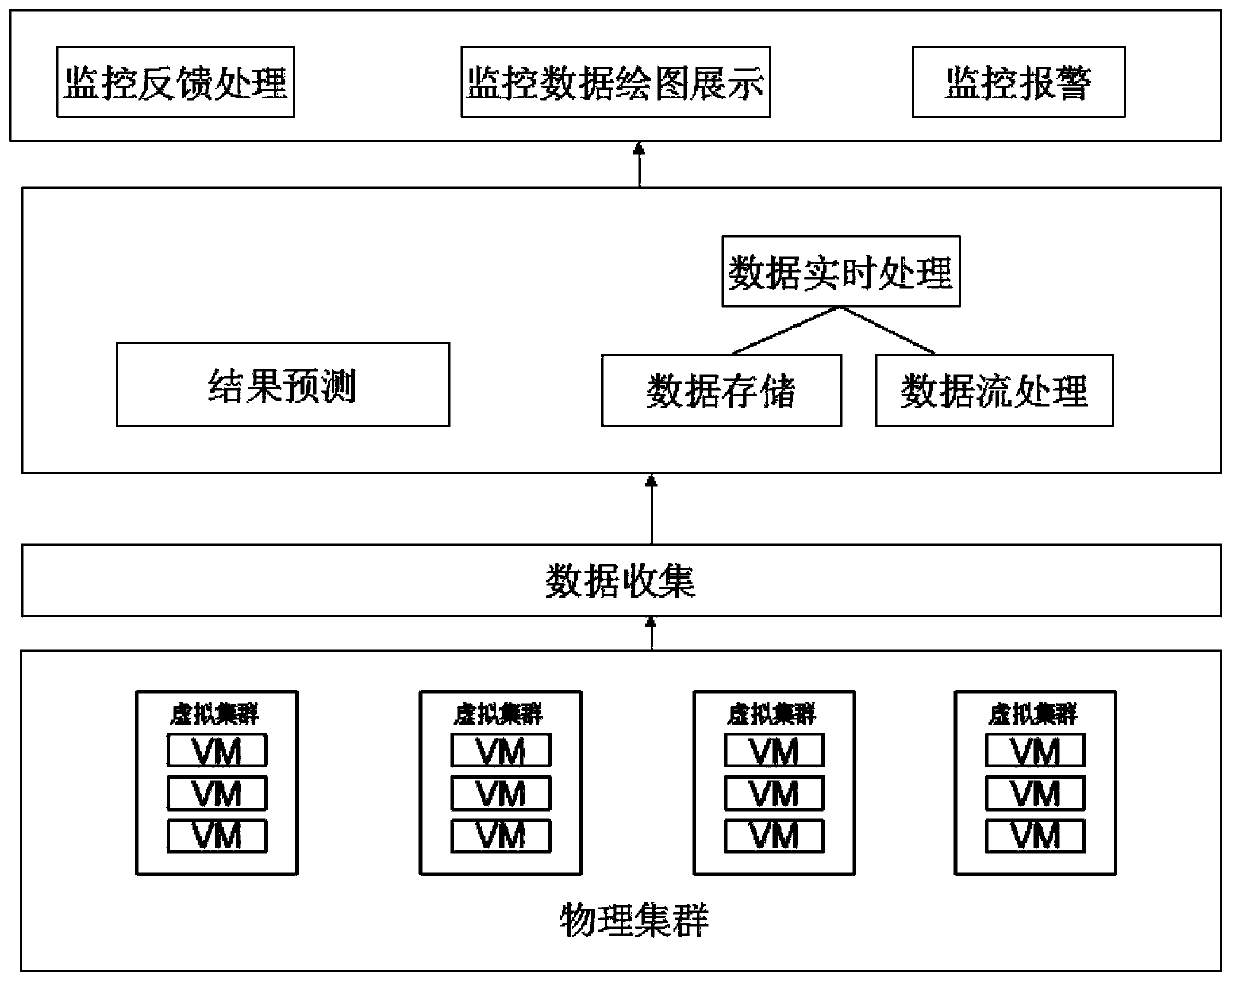 Cloud data center security monitoring early warning system and method